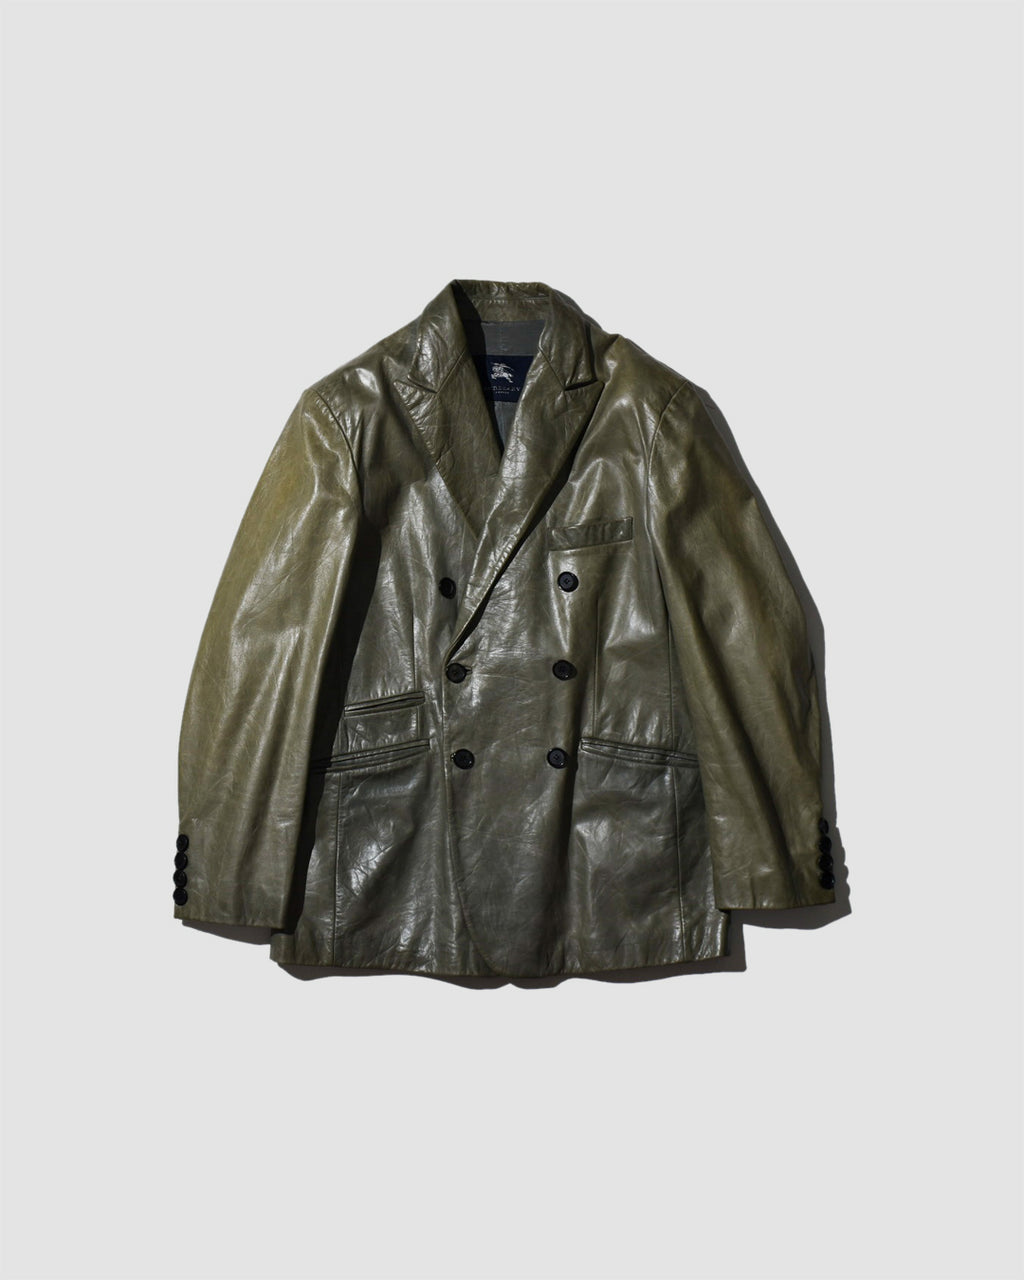 BURBERRY SAGE LEATHER DOUBLE BREASTED BLAZER - M/L